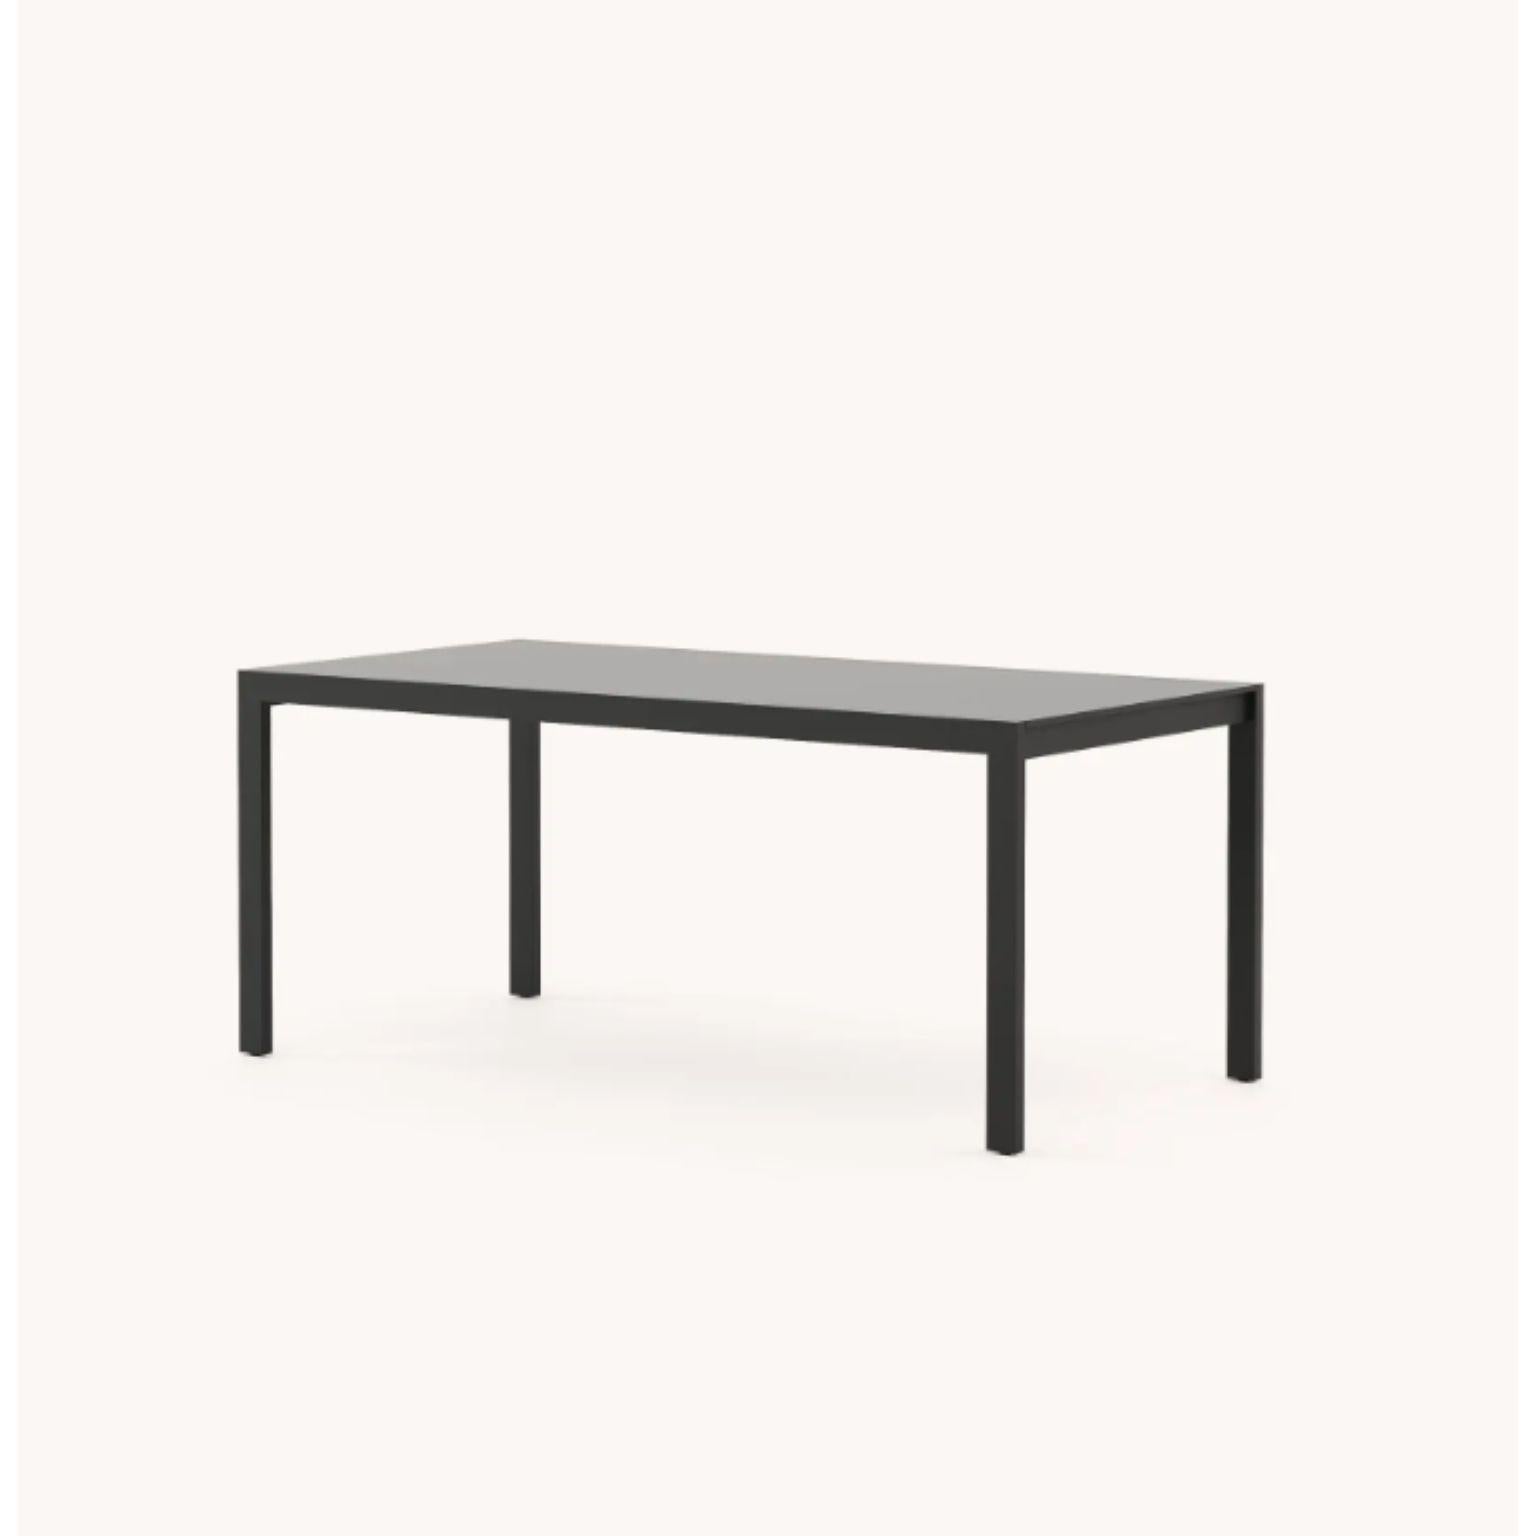 Bondi dining table by Domkapa
Materials: black texturized steel, black lacquered.
Dimensions: W 180 x D 90 x H 78 cm.
Also available in different materials. 

Gather your friends and family and celebrate summer with comfort and style with Bondi